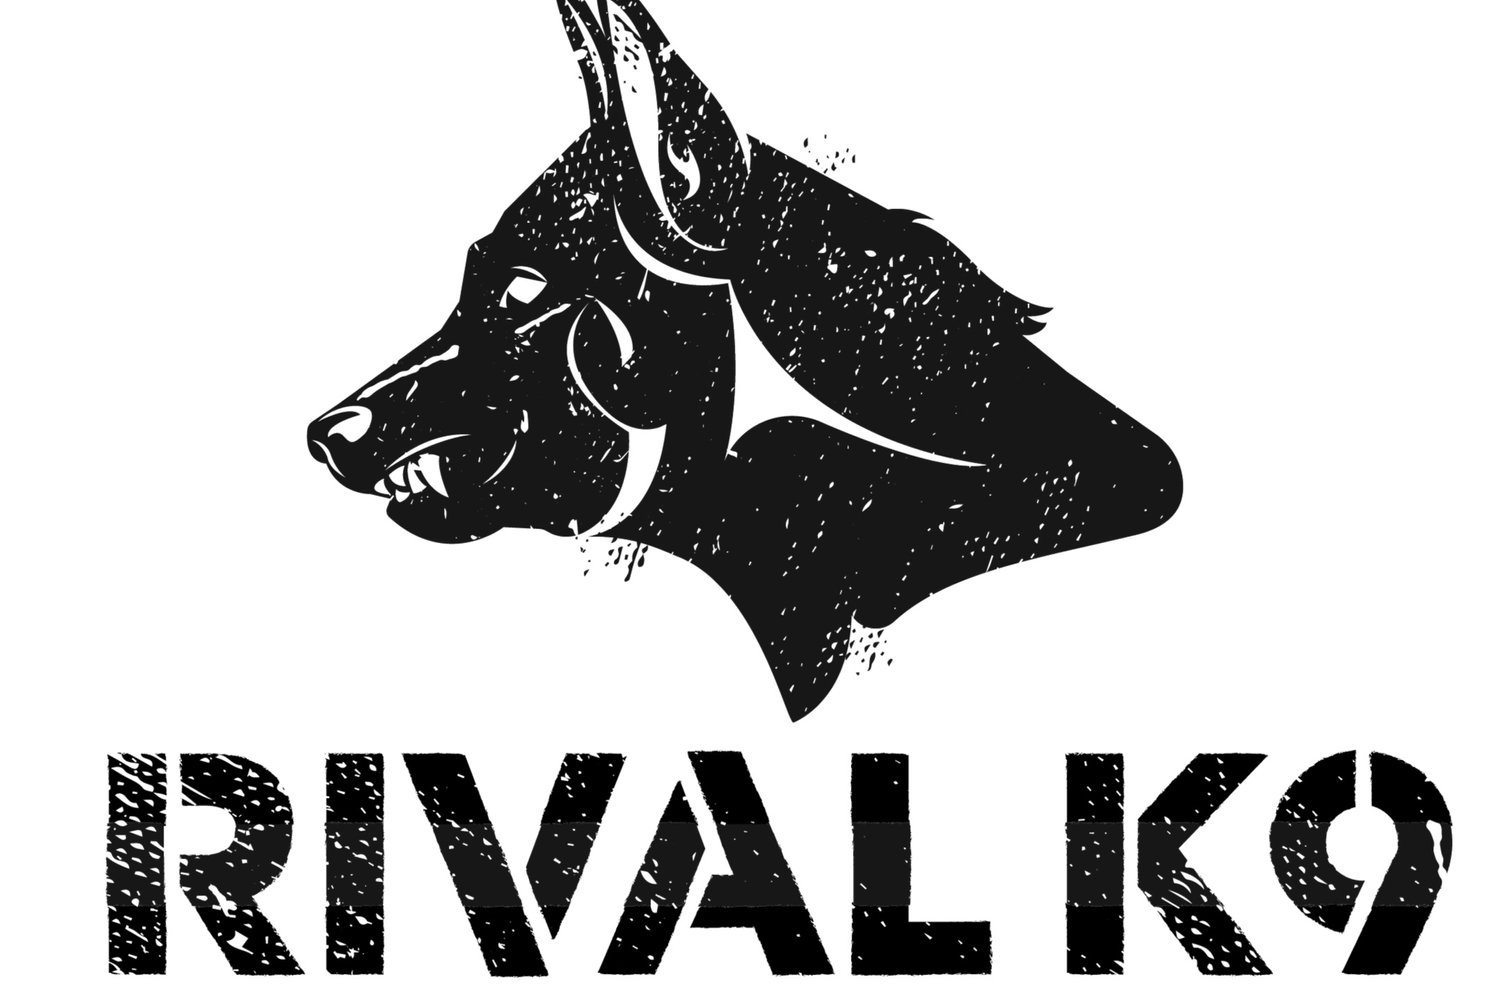 Rival K9 Working Dogs